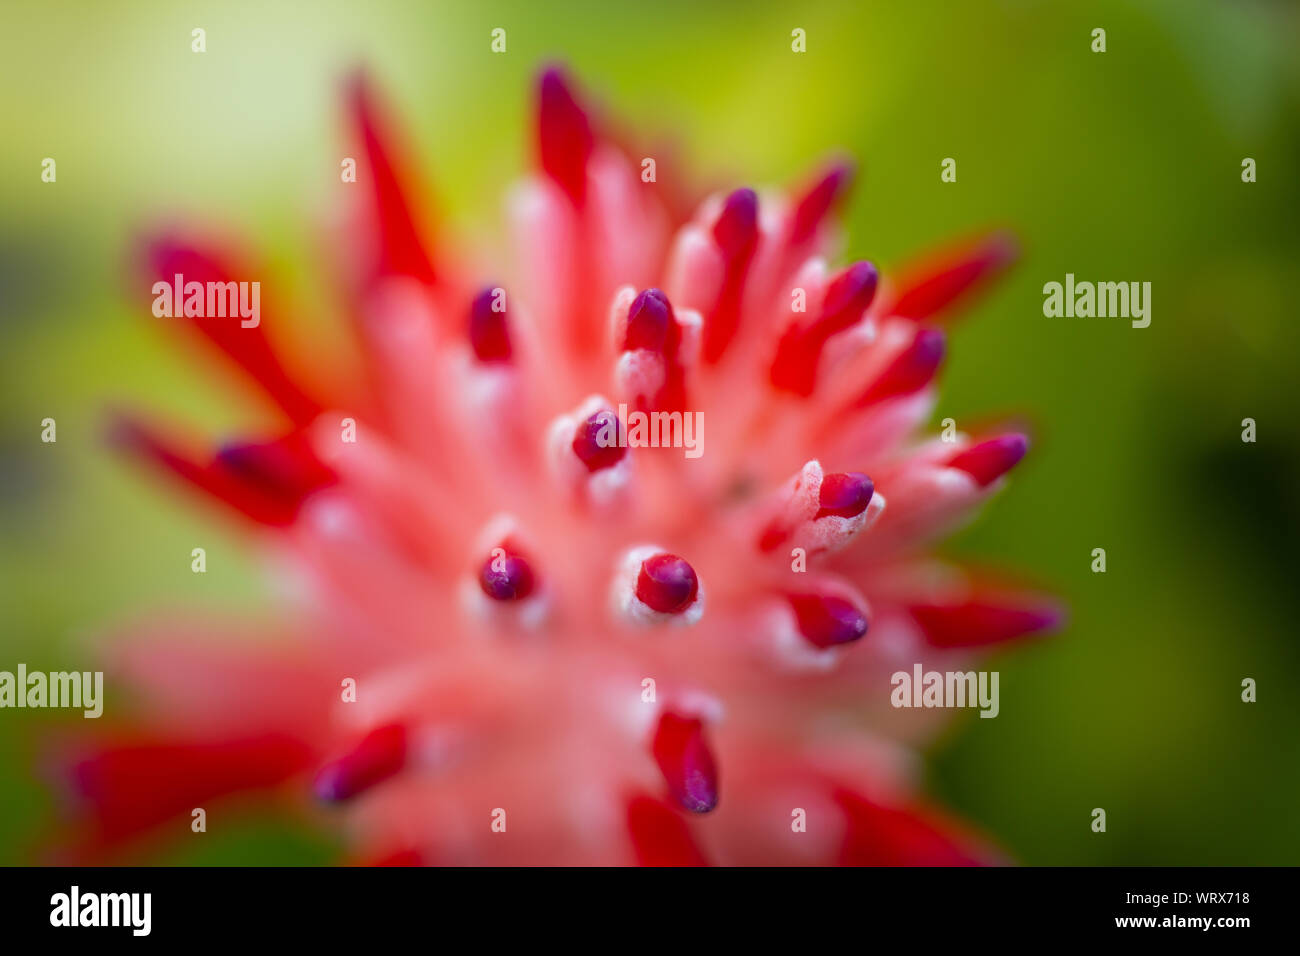 Bromeliad flower blooming in blurred garden, Close up and Marco shot Stock Photo